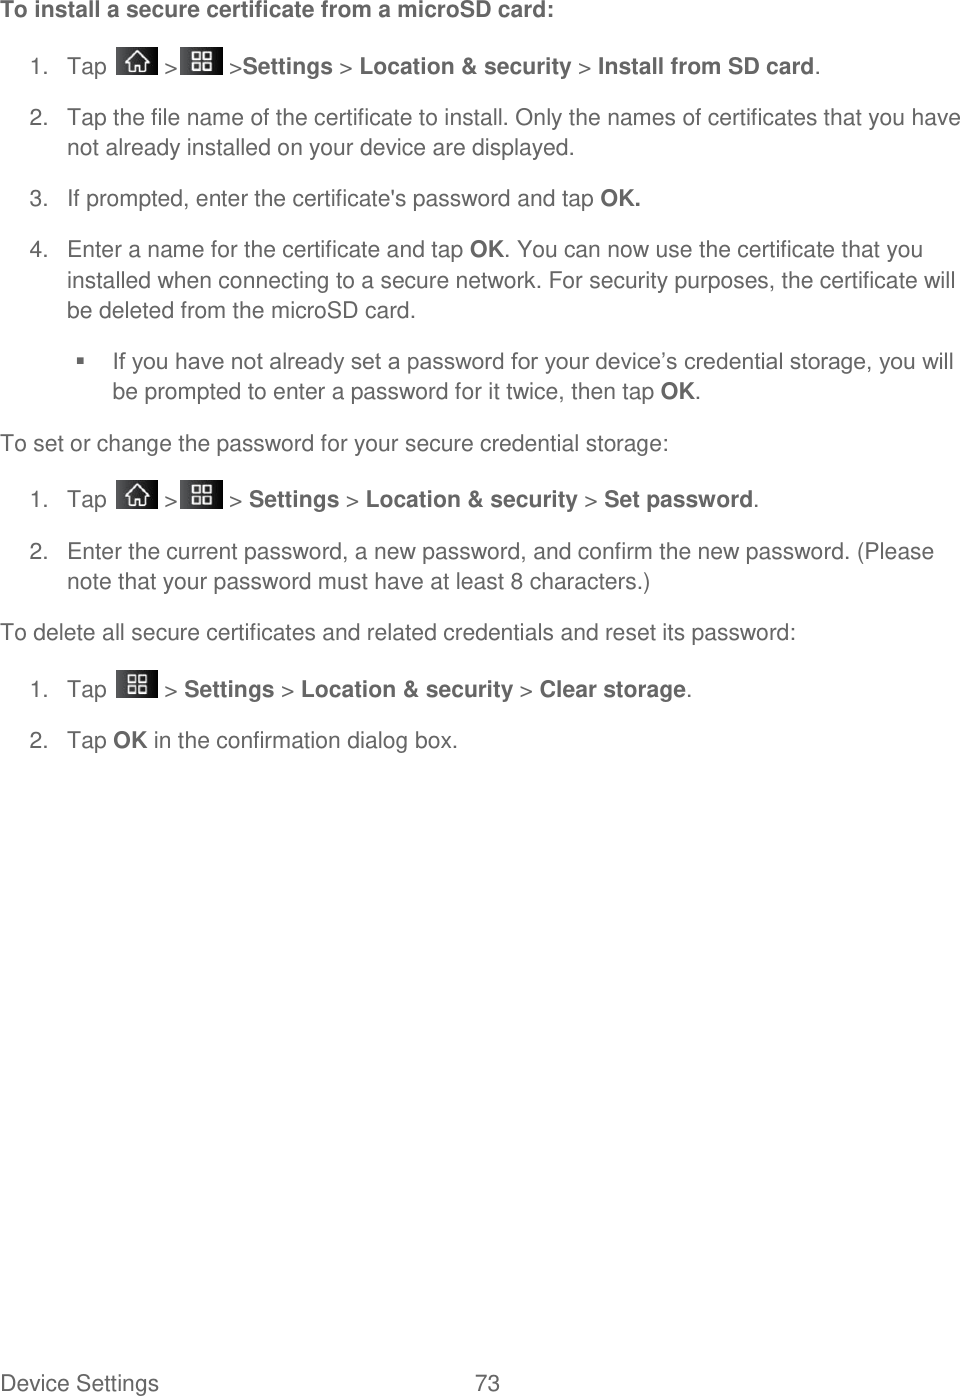 Device Settings  73 To install a secure certificate from a microSD card: 1.  Tap   &gt;  &gt;Settings &gt; Location &amp; security &gt; Install from SD card. 2.  Tap the file name of the certificate to install. Only the names of certificates that you have not already installed on your device are displayed. 3.  If prompted, enter the certificate&apos;s password and tap OK. 4.  Enter a name for the certificate and tap OK. You can now use the certificate that you installed when connecting to a secure network. For security purposes, the certificate will be deleted from the microSD card.  If you have not already set a password for your device‘s credential storage, you will be prompted to enter a password for it twice, then tap OK. To set or change the password for your secure credential storage: 1.  Tap   &gt;  &gt; Settings &gt; Location &amp; security &gt; Set password. 2.  Enter the current password, a new password, and confirm the new password. (Please note that your password must have at least 8 characters.) To delete all secure certificates and related credentials and reset its password: 1.  Tap   &gt; Settings &gt; Location &amp; security &gt; Clear storage. 2.  Tap OK in the confirmation dialog box.    